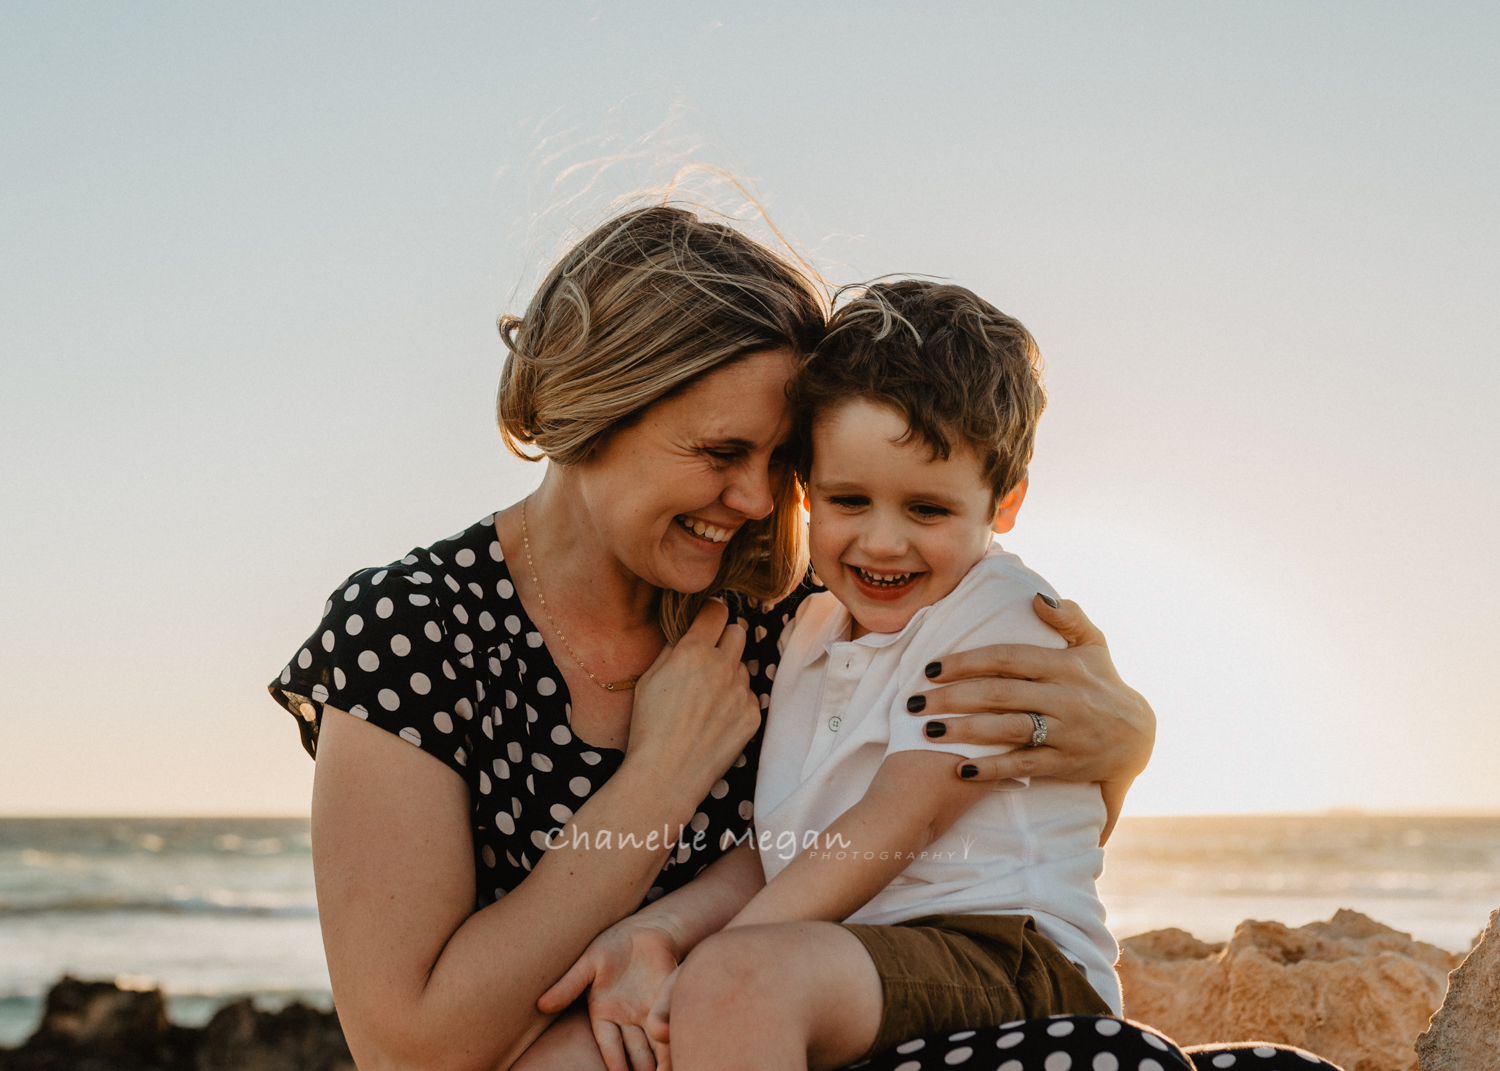 Perth lifestyle Photographer capturing authentic Mummy and Me moments by Chanelle Megan Photography